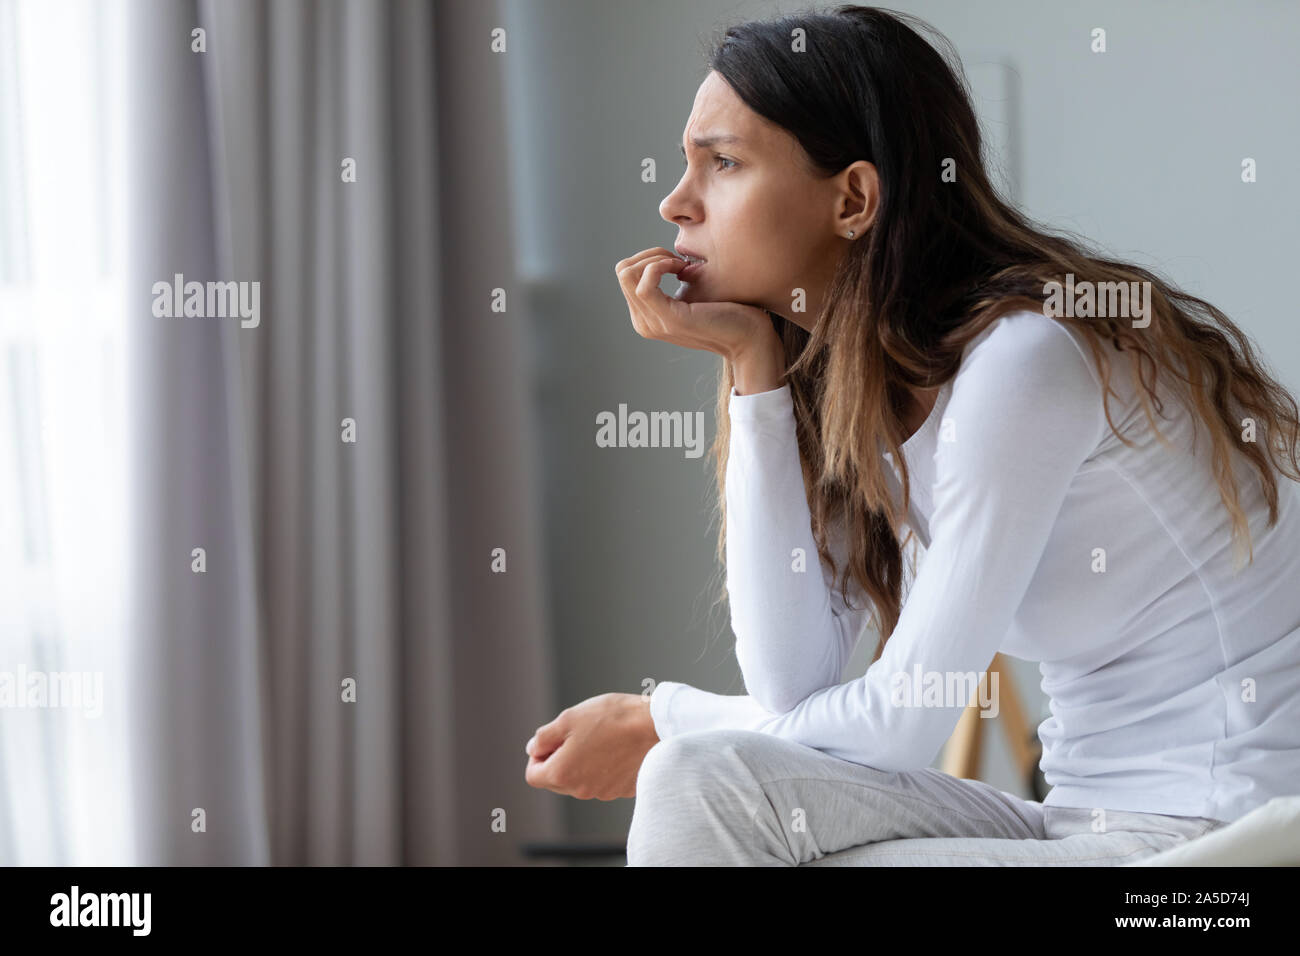 Anxieux confus young mixed race woman biting nails. Banque D'Images